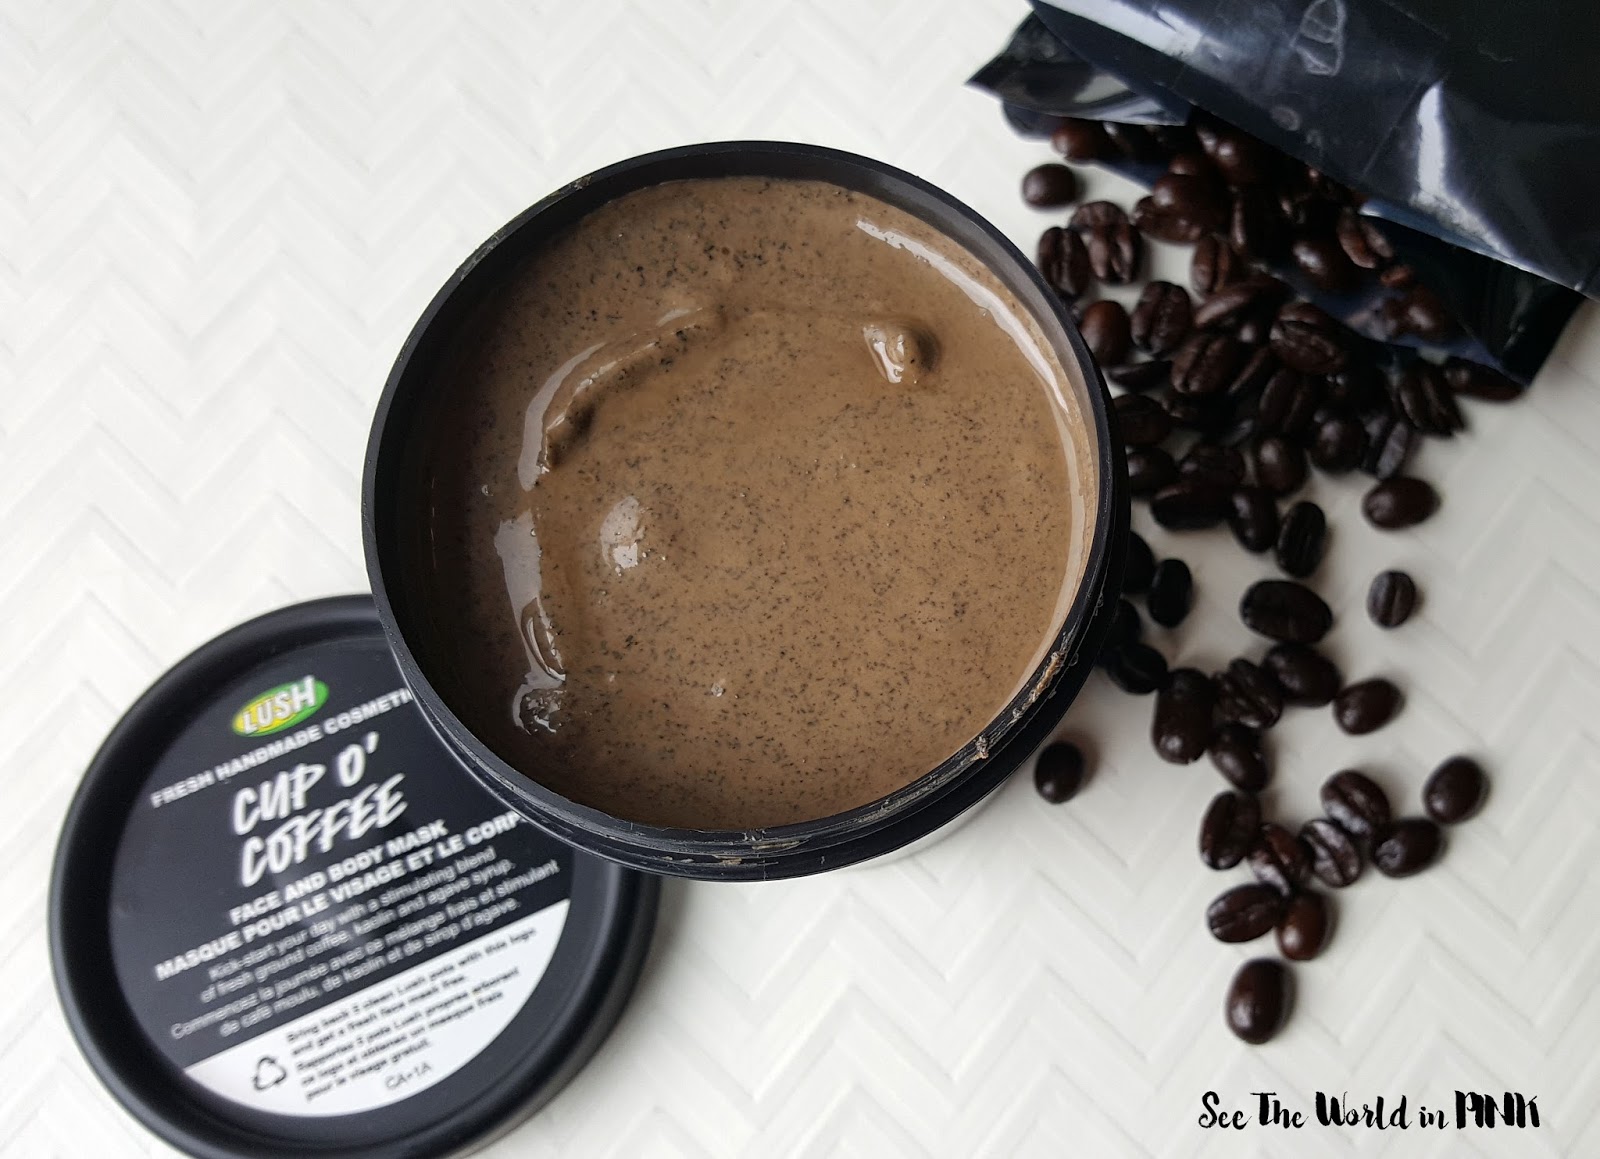 Earth Day Skincare Saturday - Lush Cup O' Coffee Mask Review and A Look At Lush's Environmental Practices! 